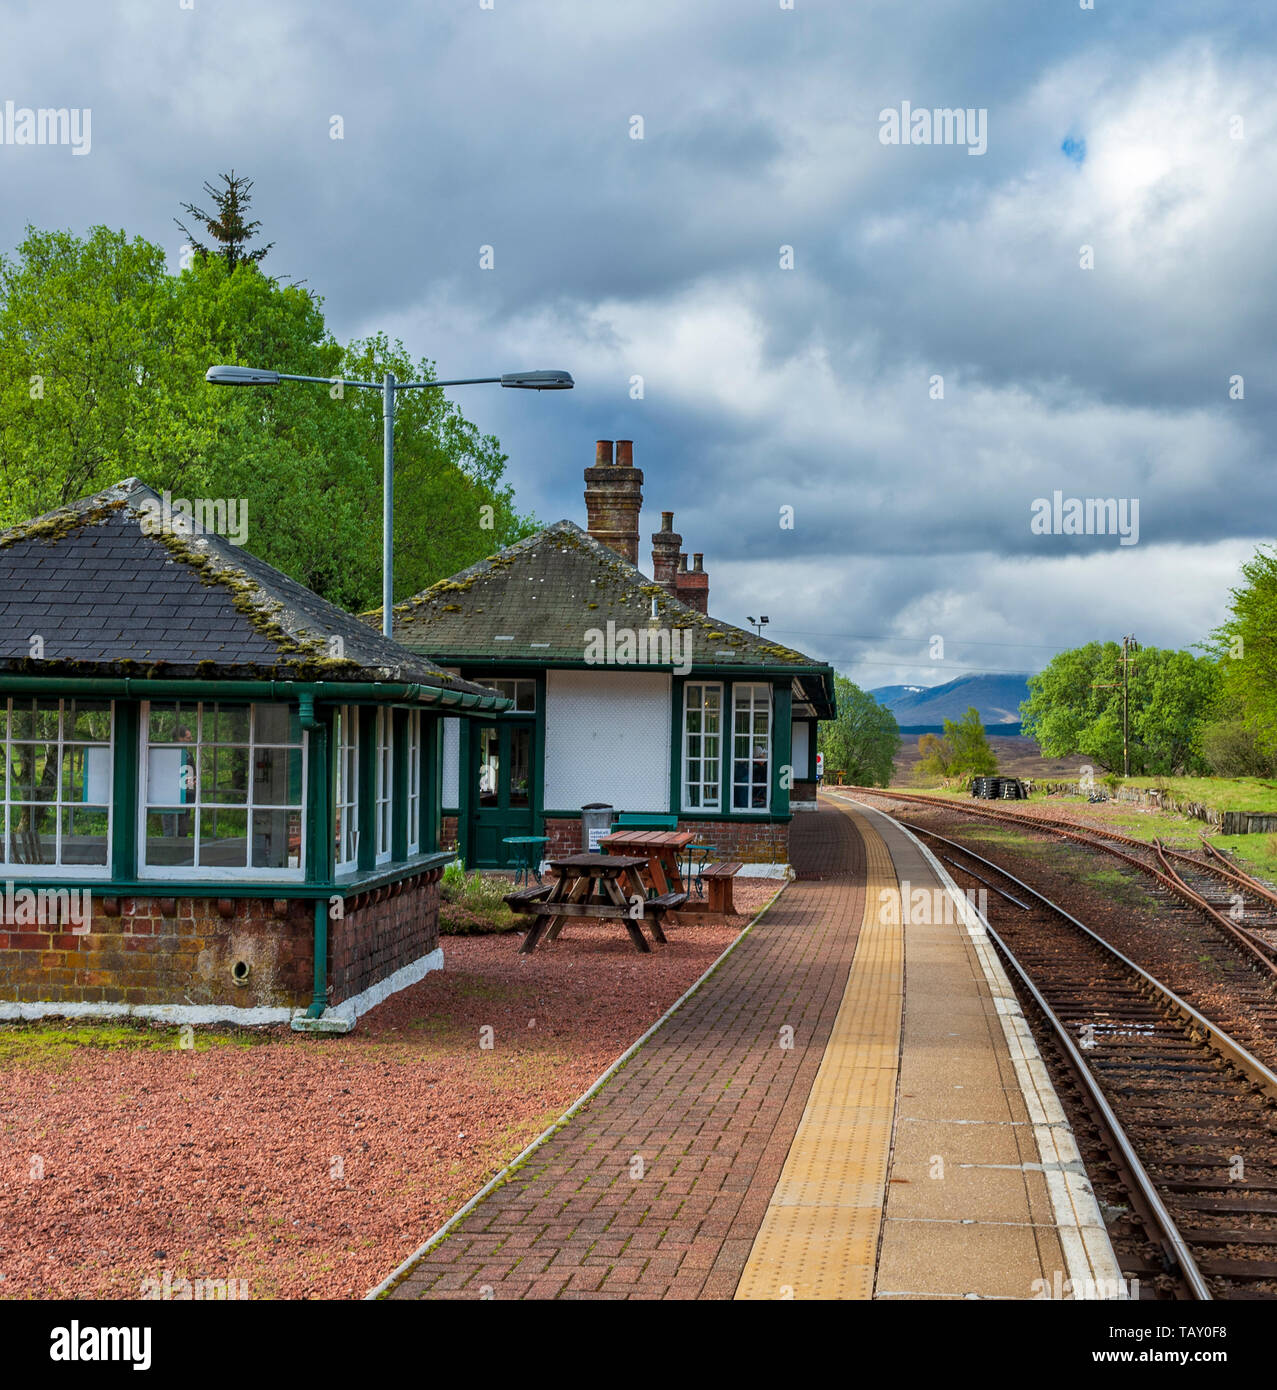 Rannoch Station, Perth and Kinross, Scotland, United Kingdom - One of the most remote railway stations in the British Isles on the edge of Rannoch Moor, Scotland Stock Photo